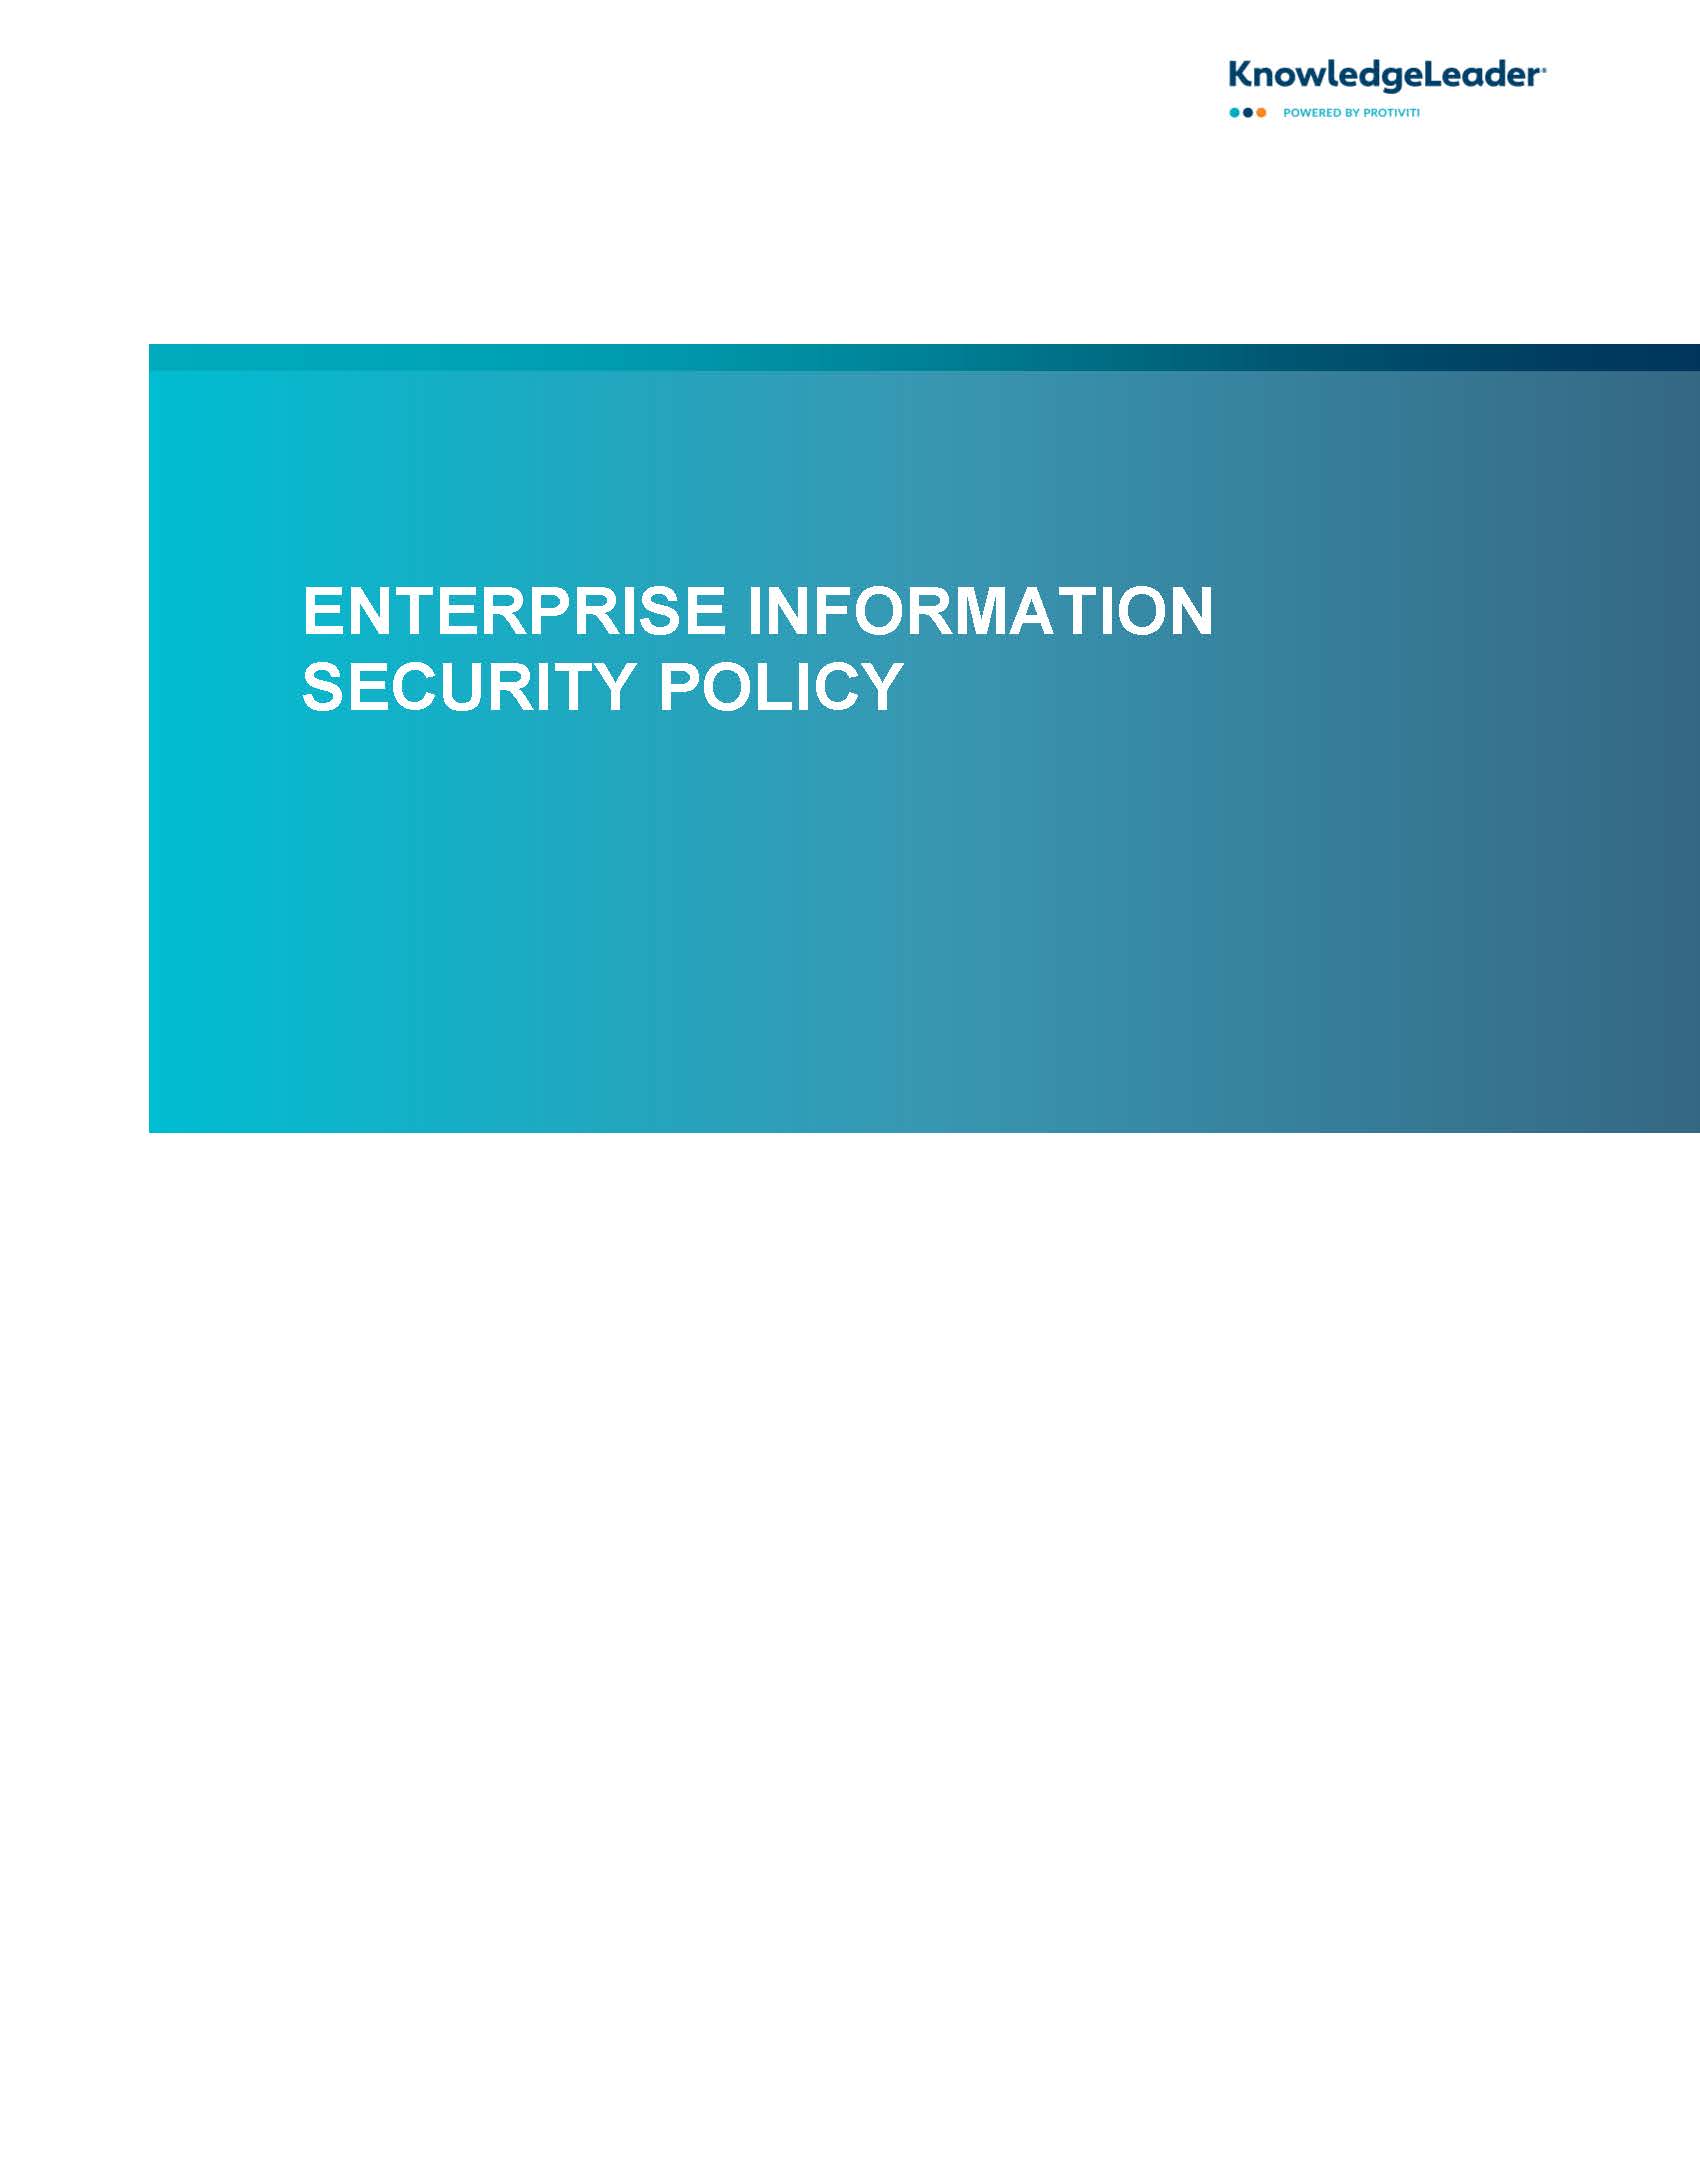 Screenshot of the first page of Enterprise Information Security Policy